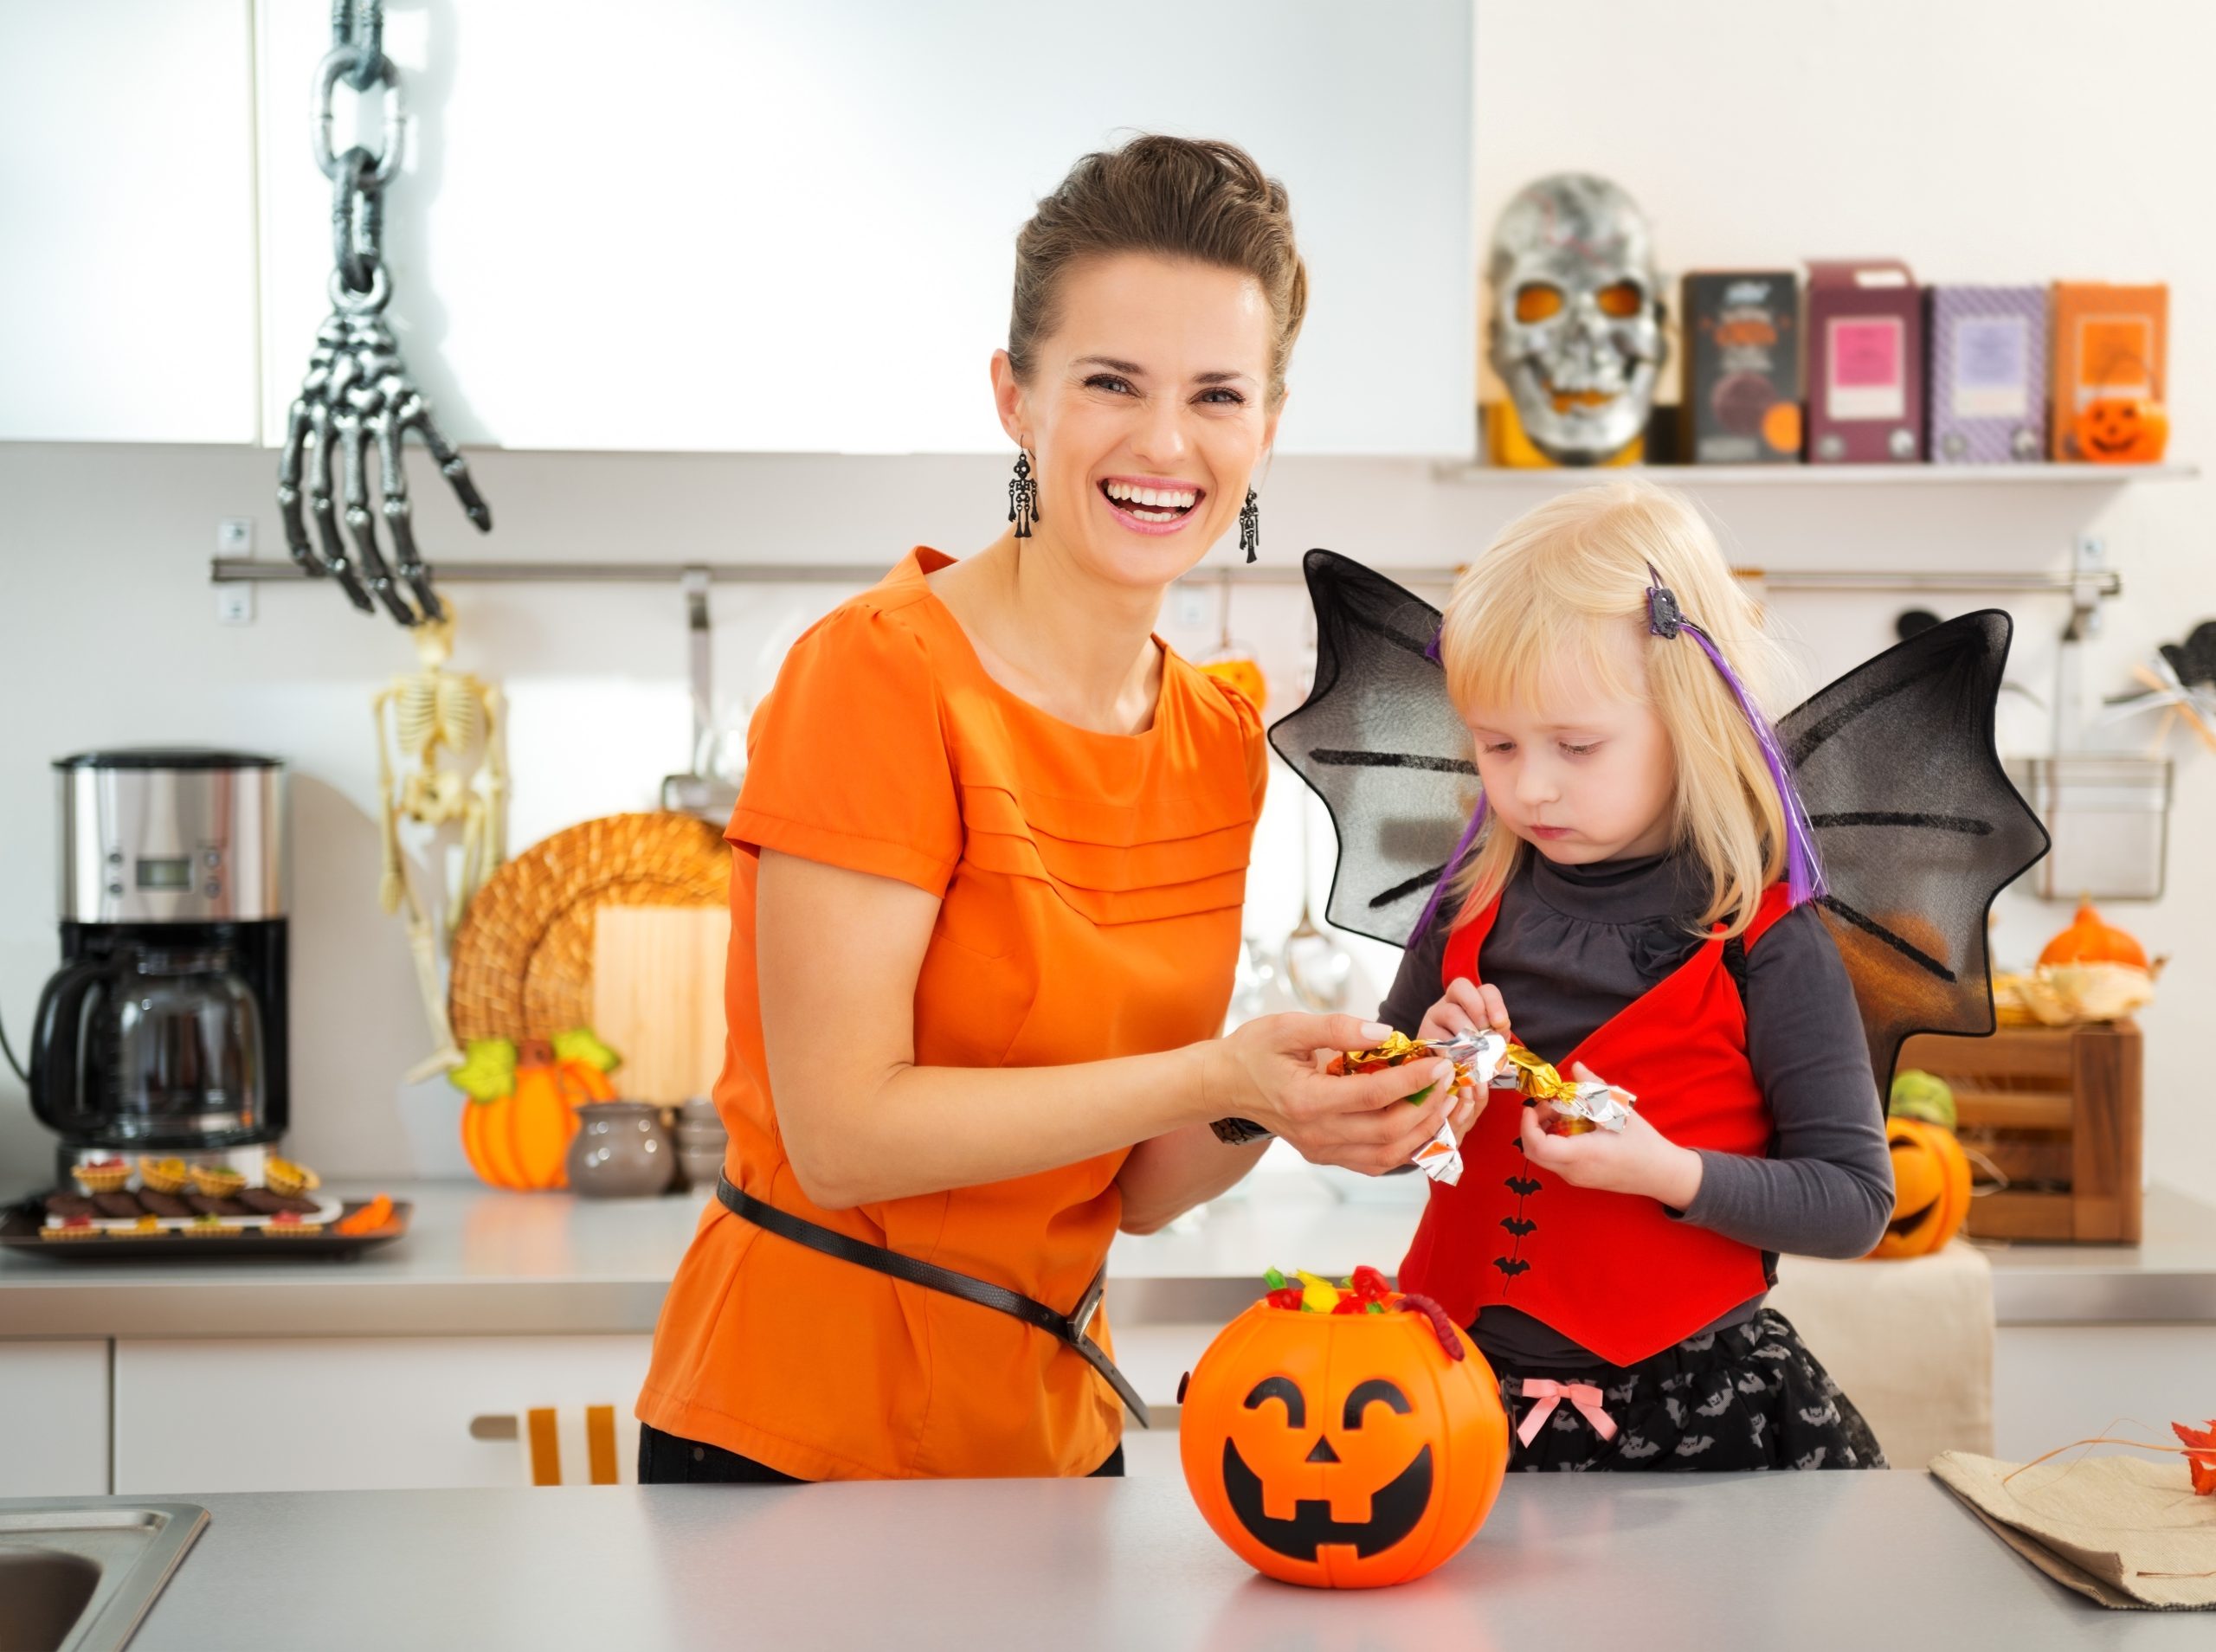 Hands Off Your Kid’s Trick-or-Treat Candy! Try these 9 Sugar-Free Options Instead